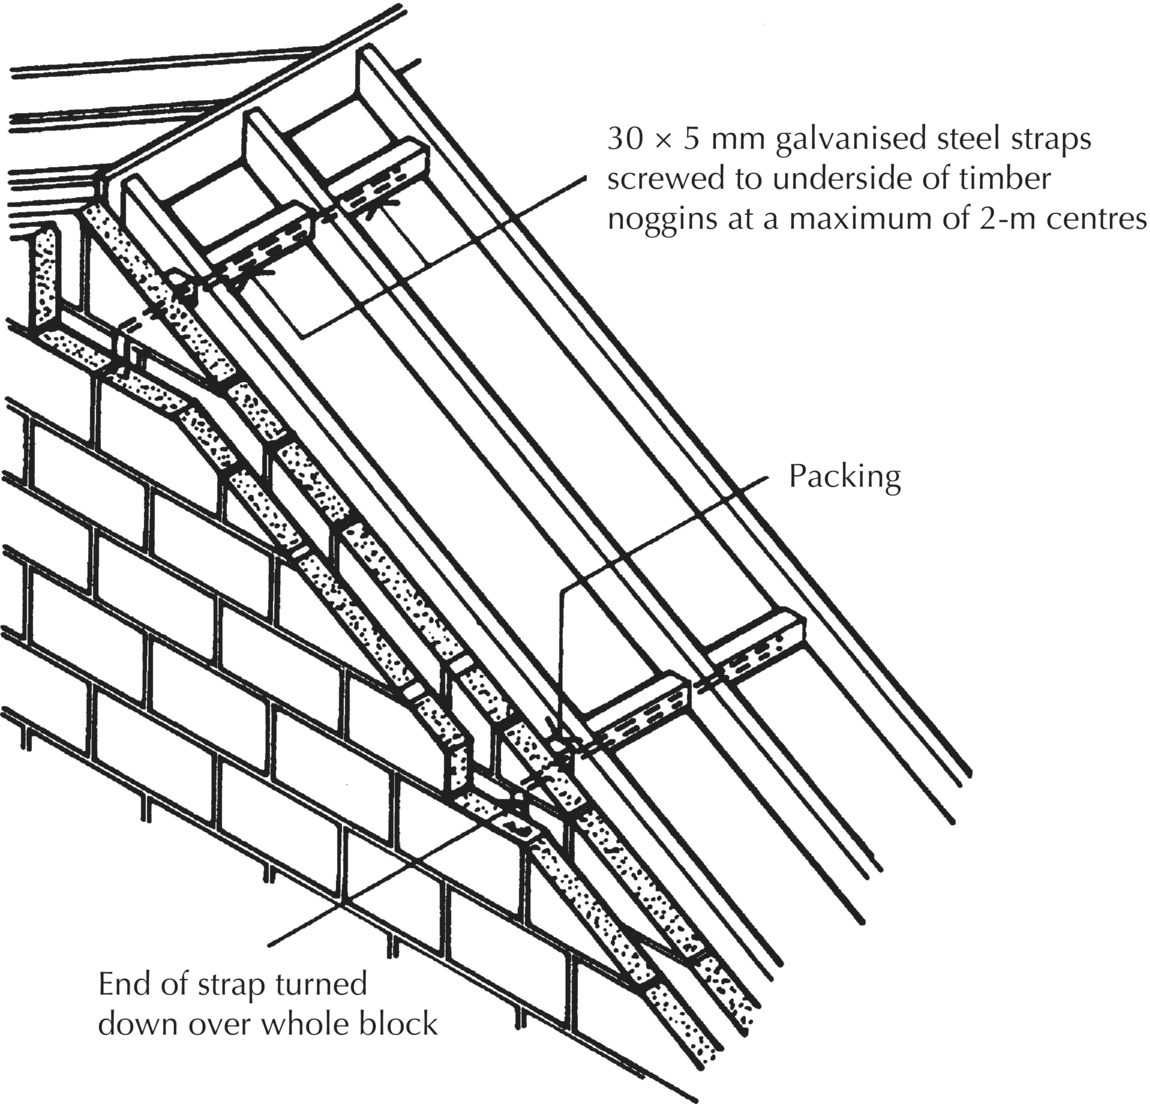 Diagram illustrating lateral support to gable ends in a roof of a building with arrows indicating end of strap turned down over whole block, packing, and 30 x 5 mm galvanised steel straps screwed to underside of timber noggins.